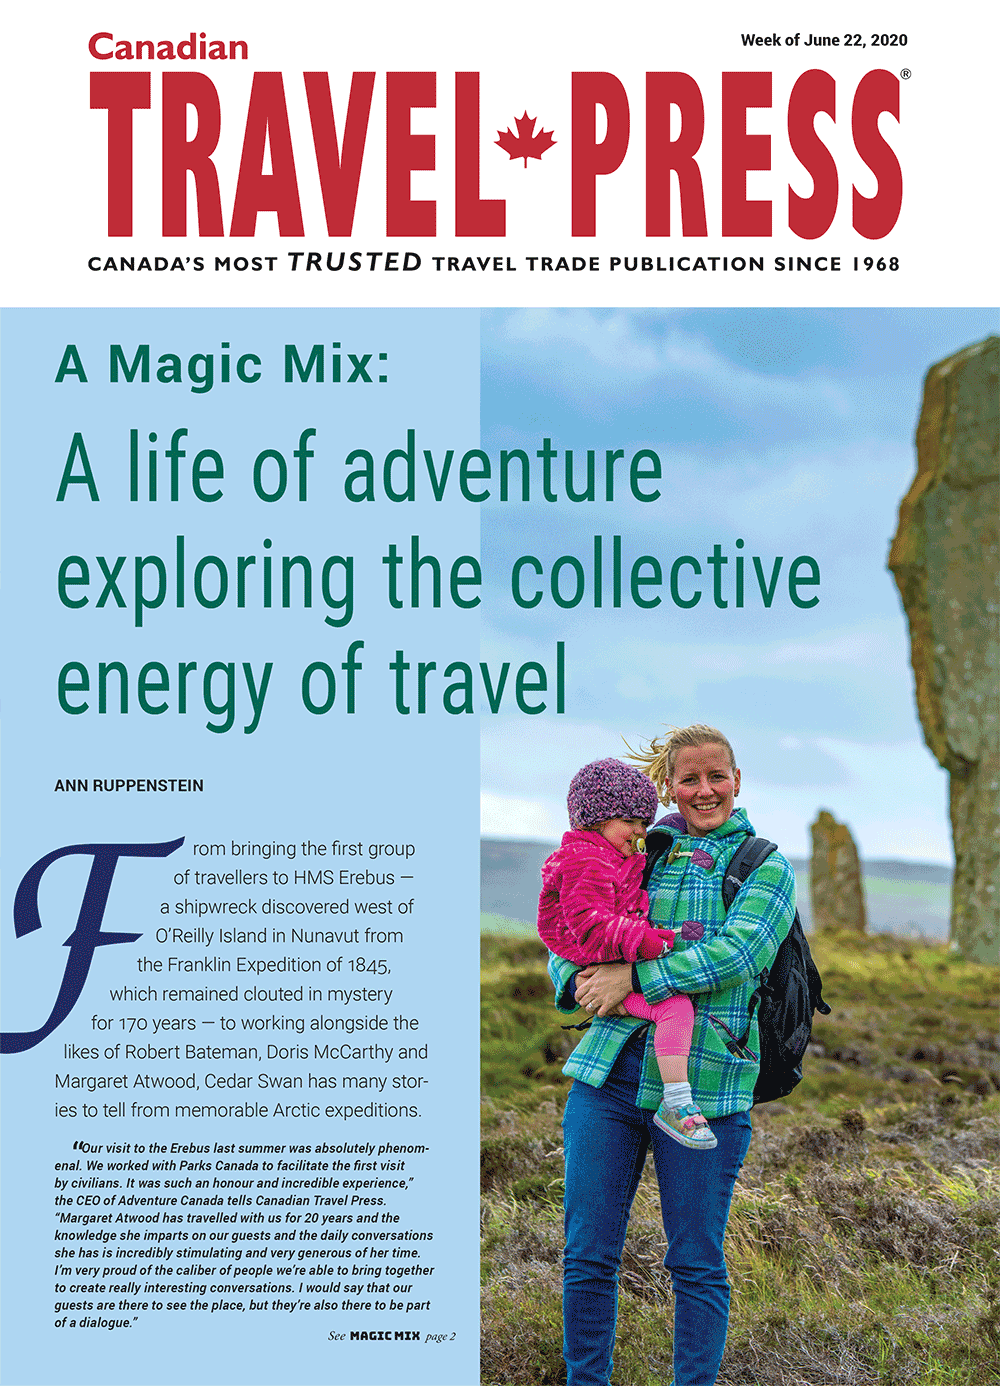 The collective energy of travel: A magic mix